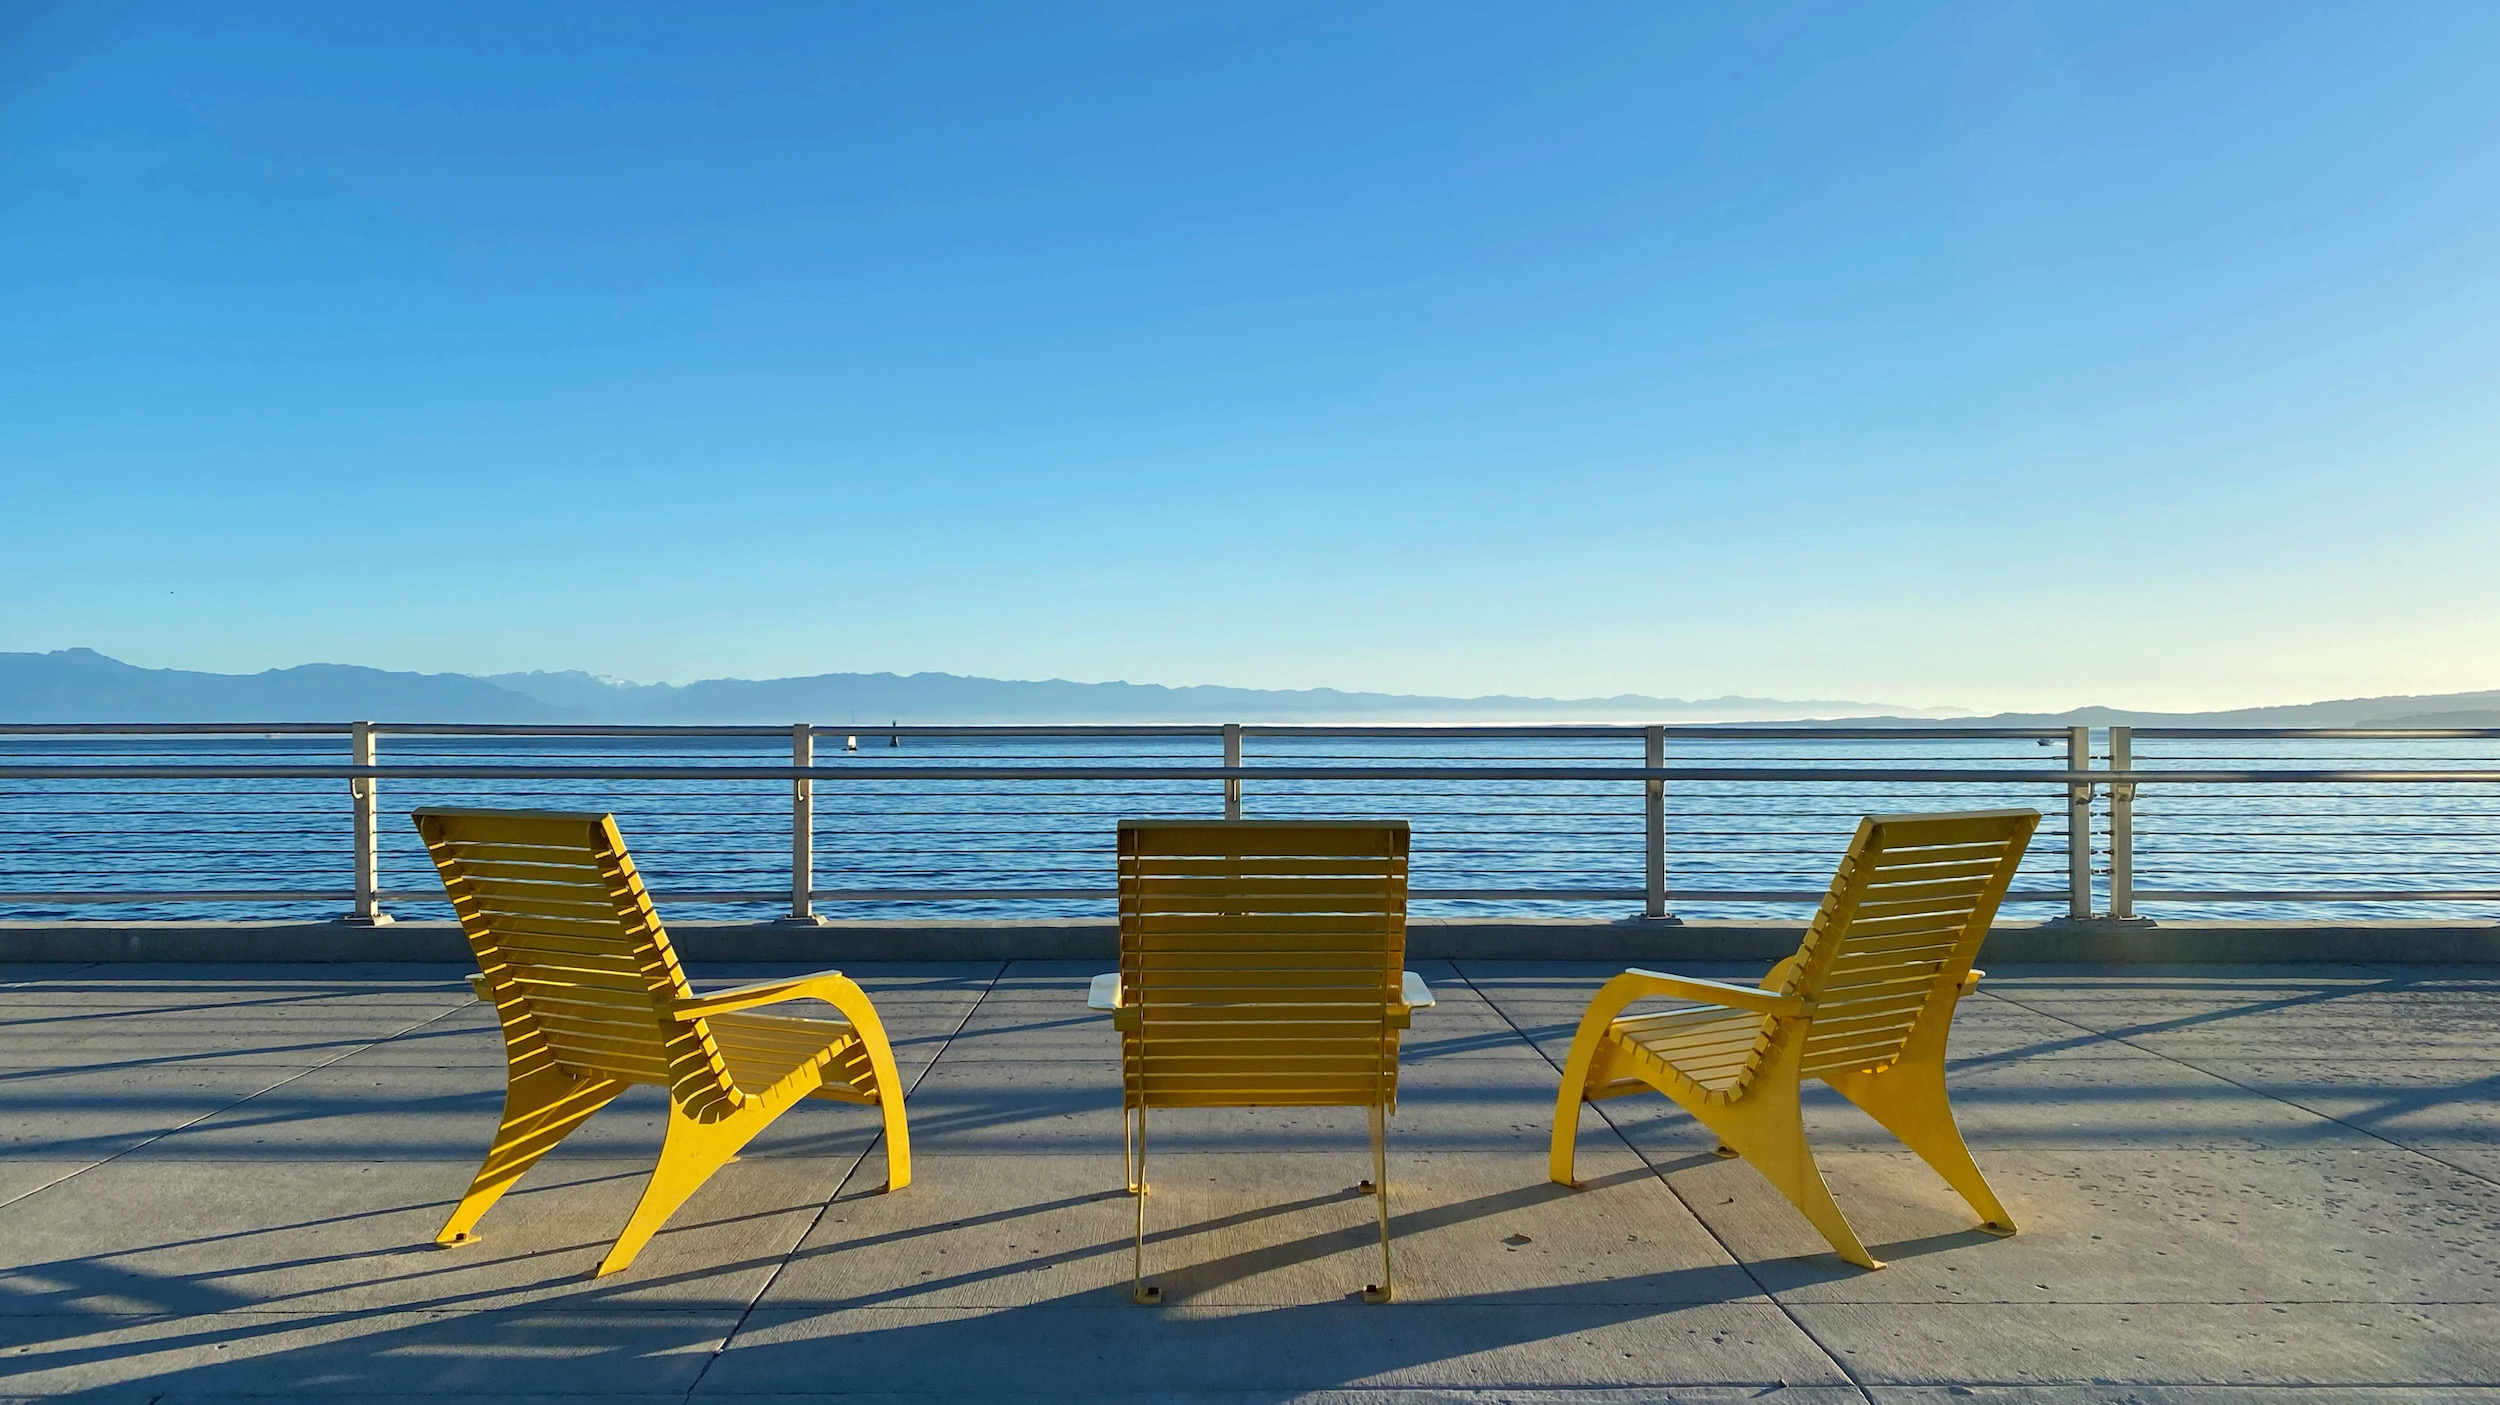 Three yellow chairs overlooking the ocean